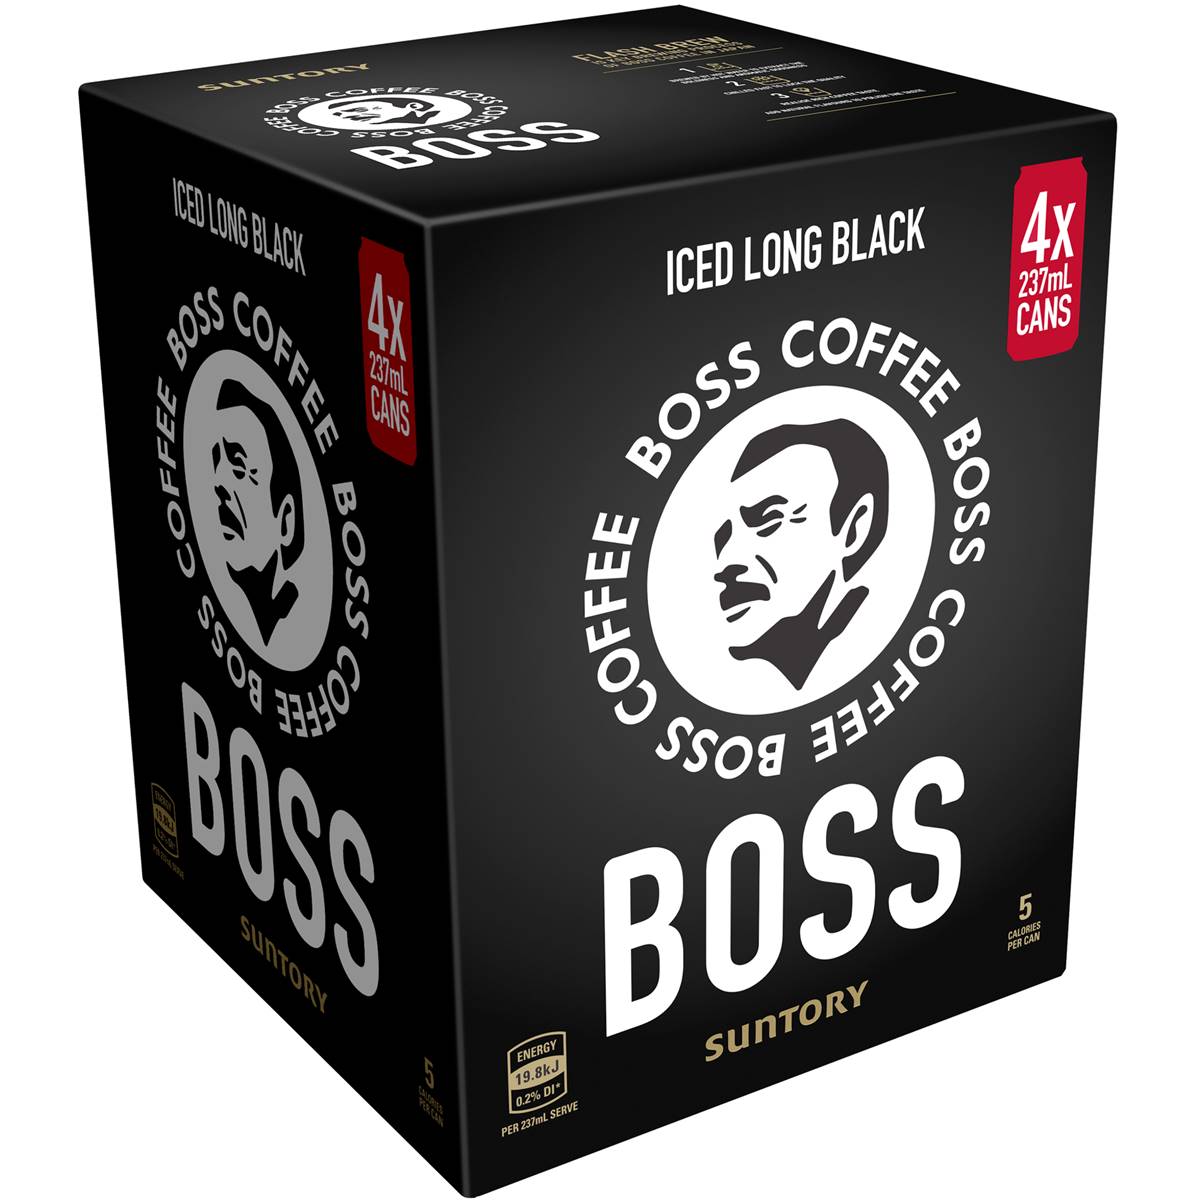 Calories in Suntory Boss Coffee Iced Long Black Cans